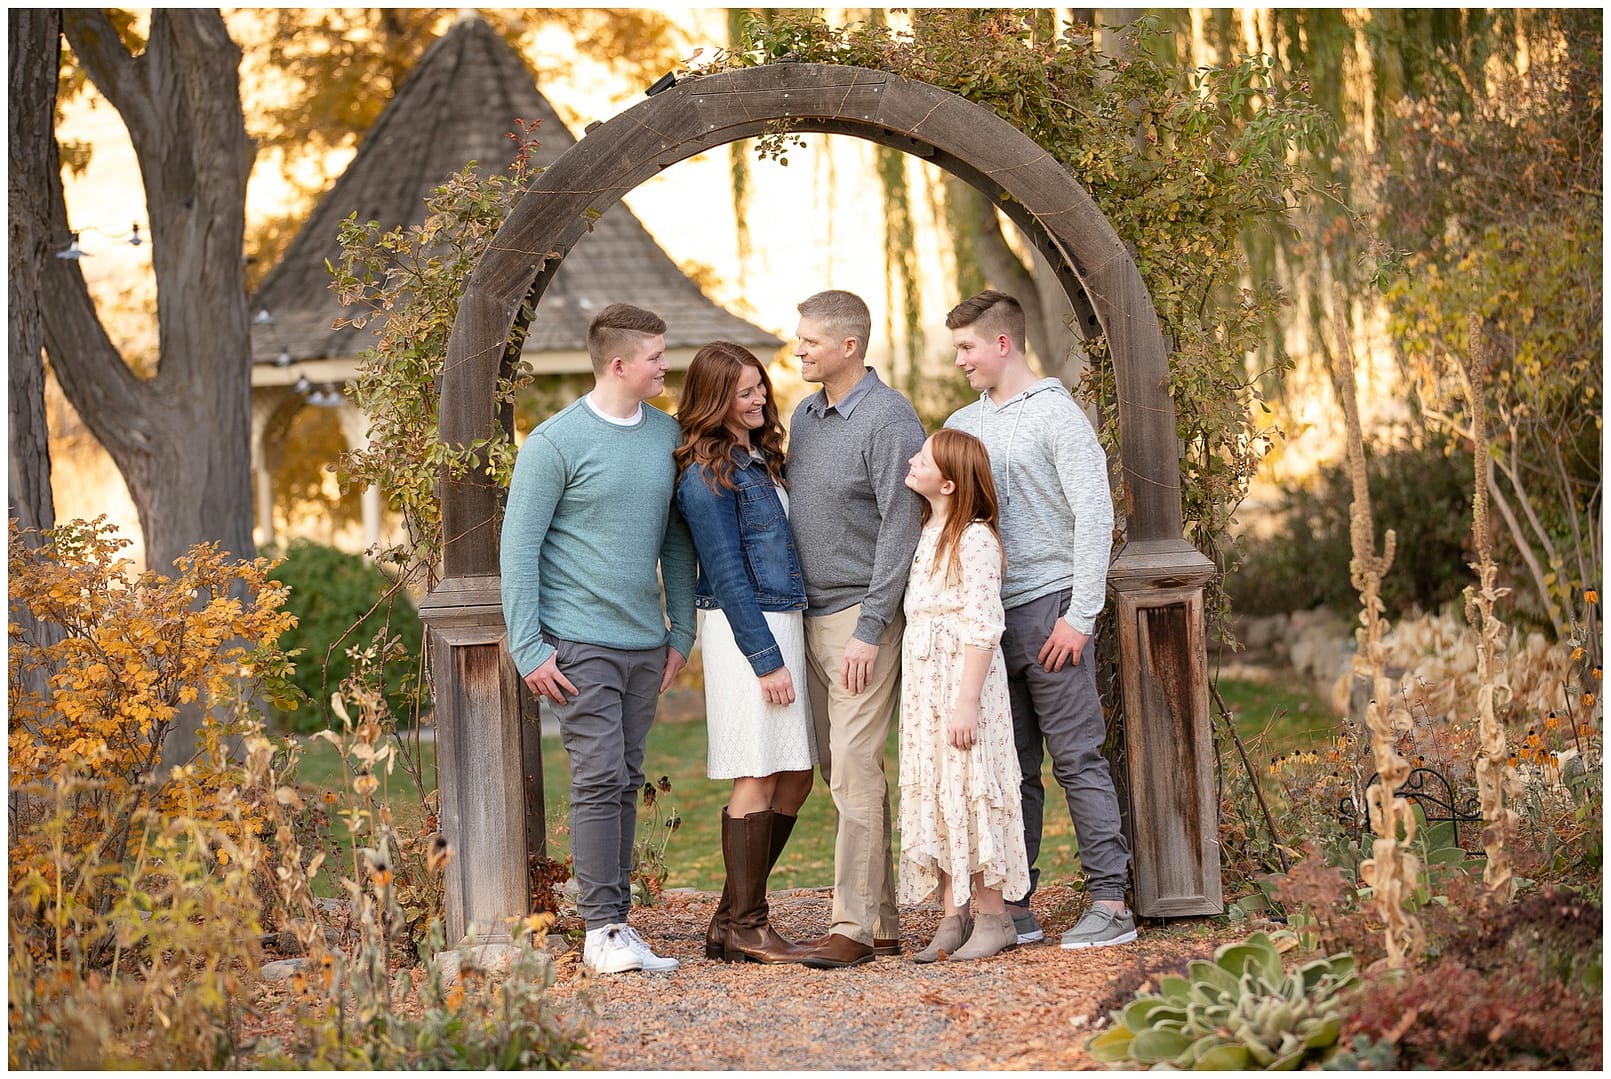 Boise family poses in front of arch. Photo by Tiffany Hix Photography.